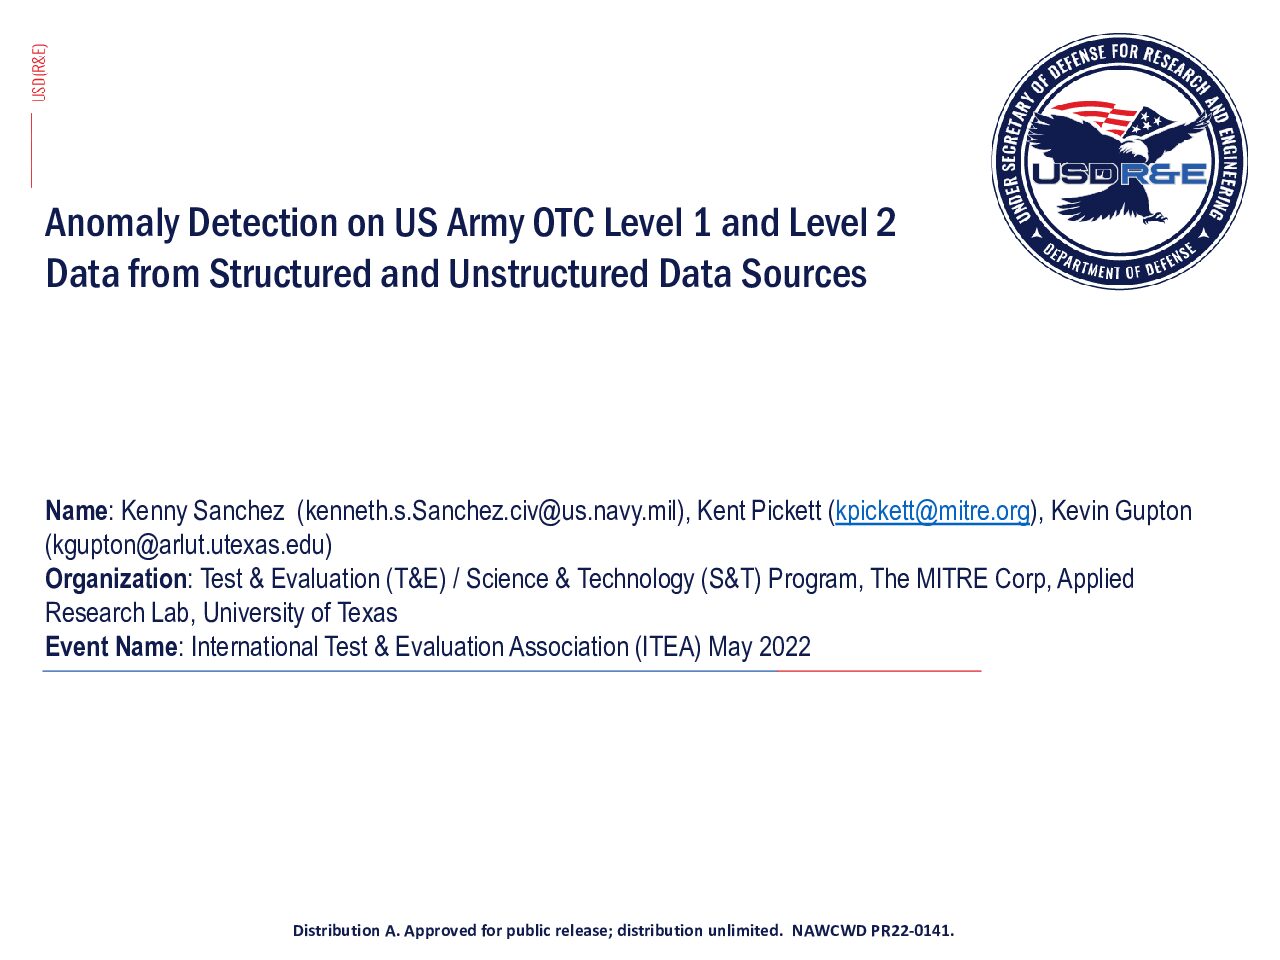 16-3_Pickett_ITEA Anomaly Detection on US Army OTC Brief_Final Approved 05-09-22